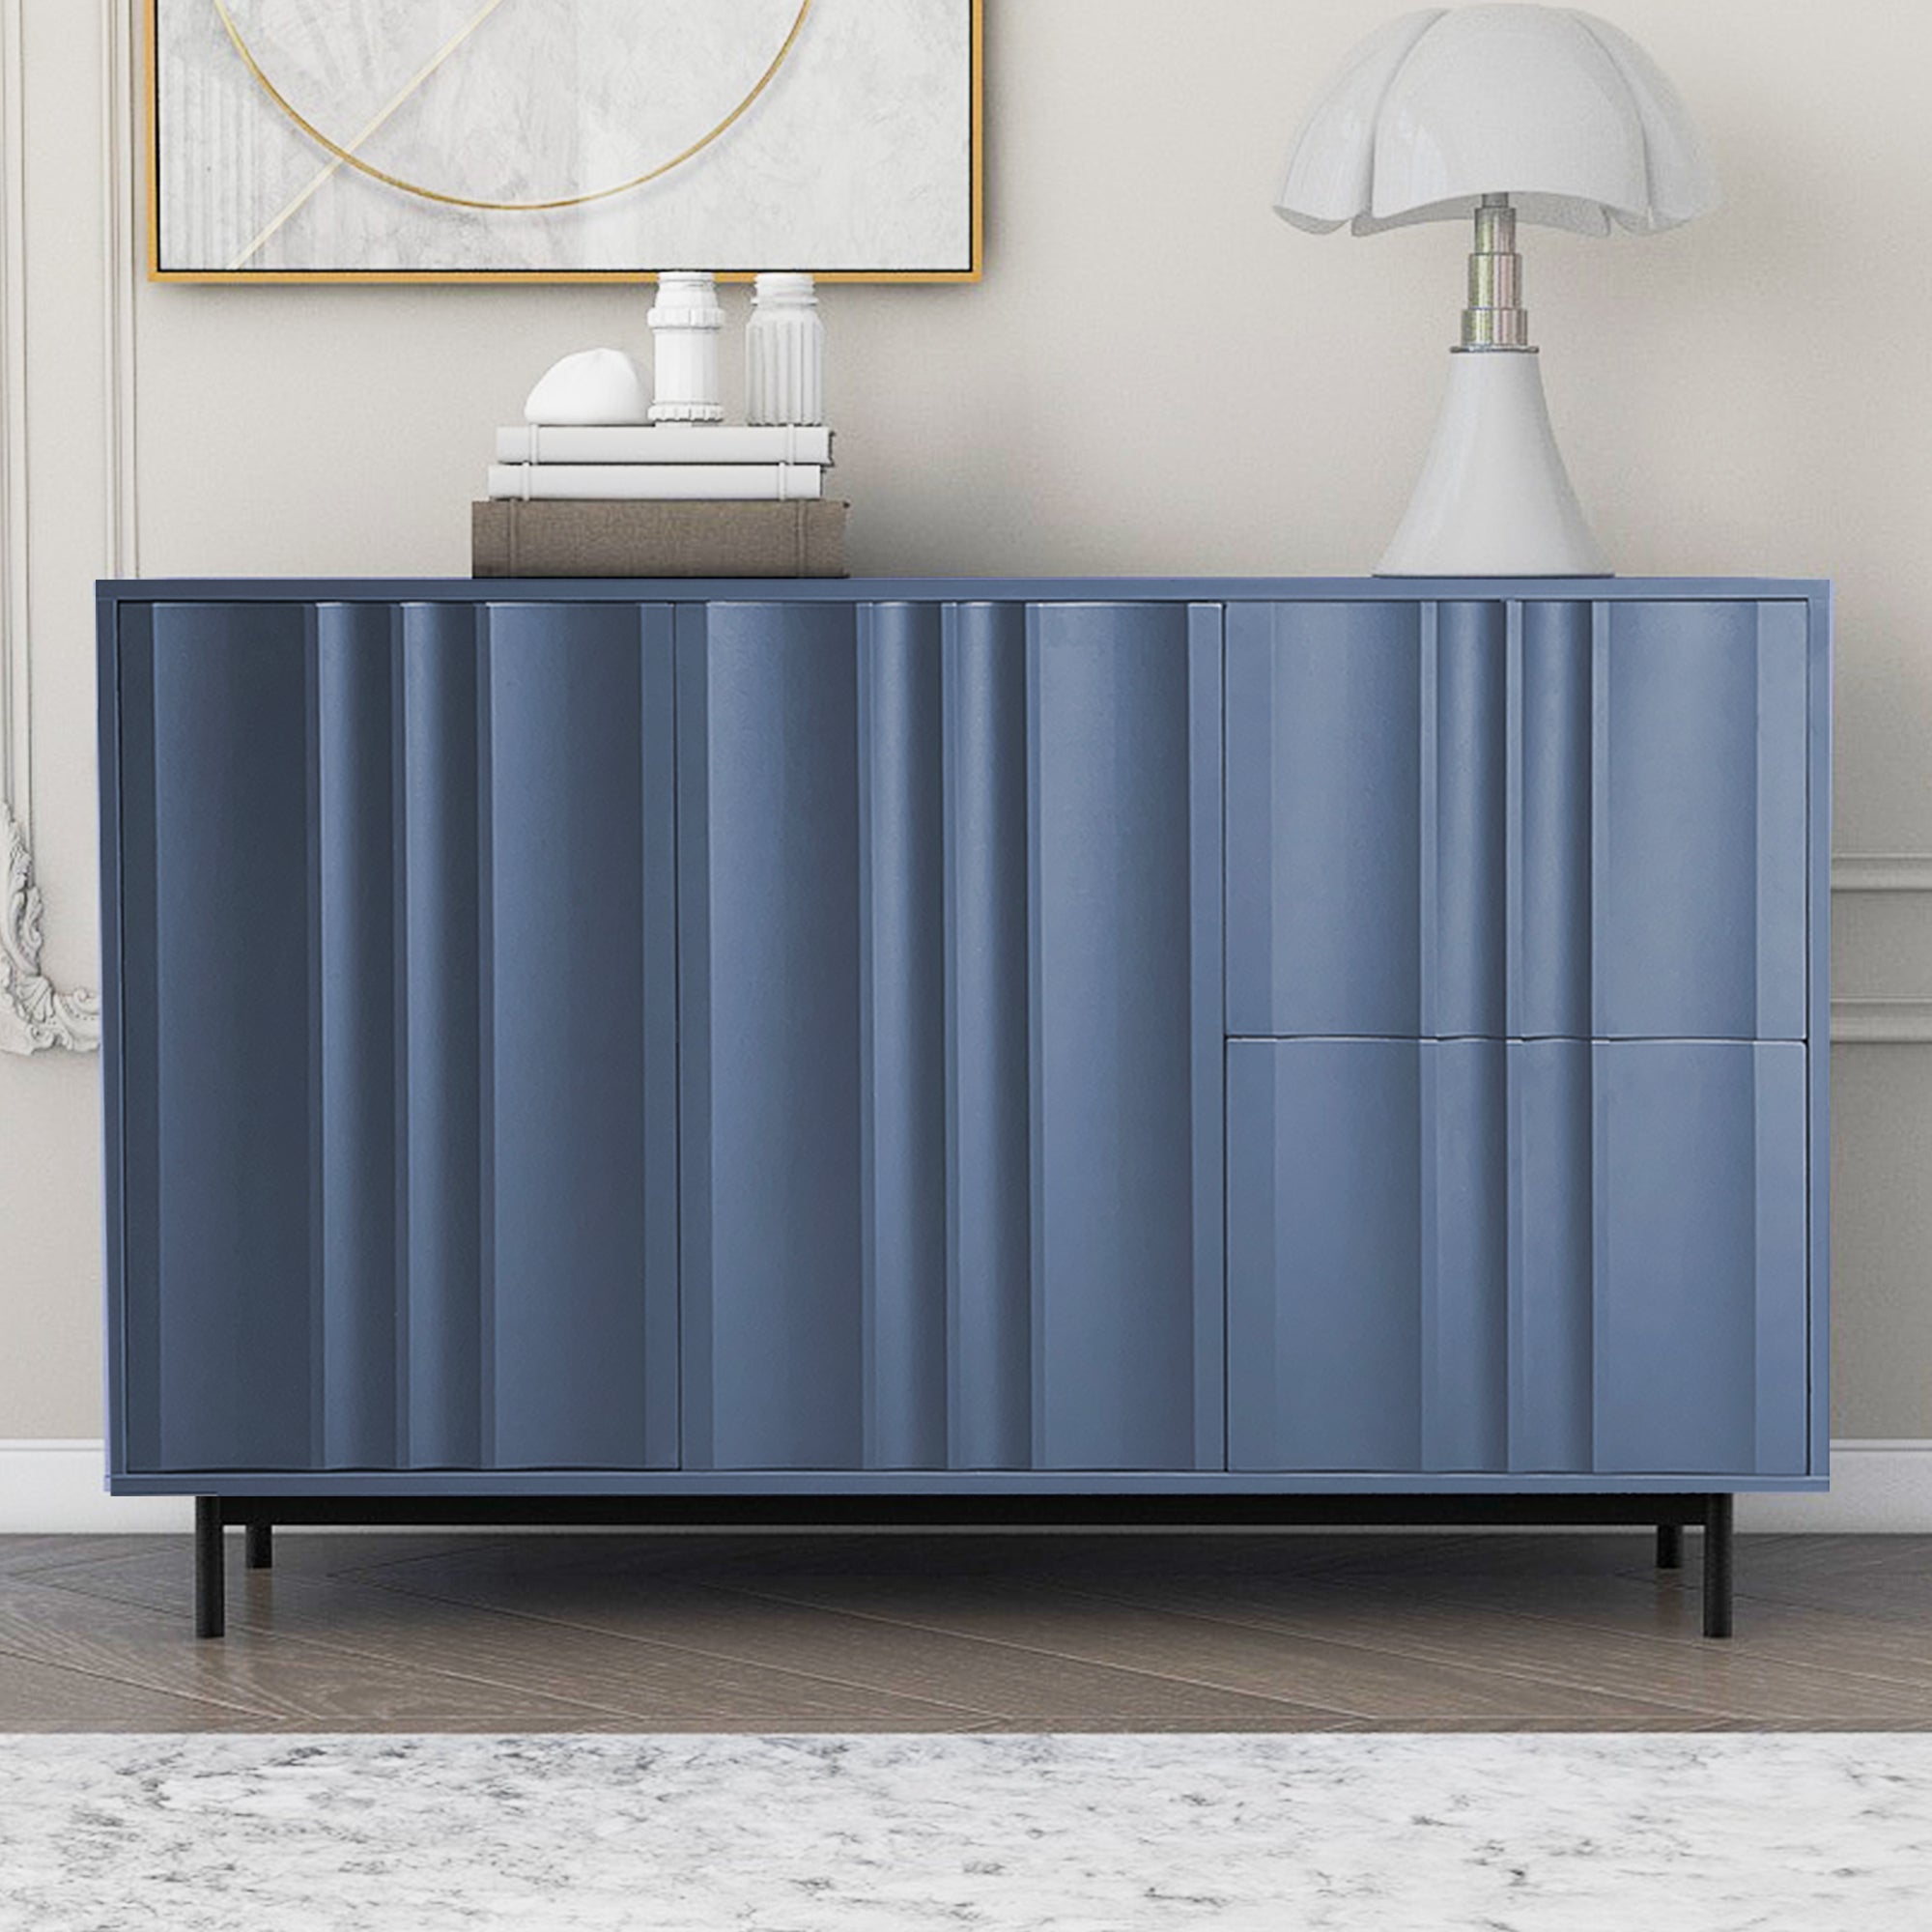 U STYLE Wave Pattern Storage Cabinet with 2 Doors and navy blue-mdf